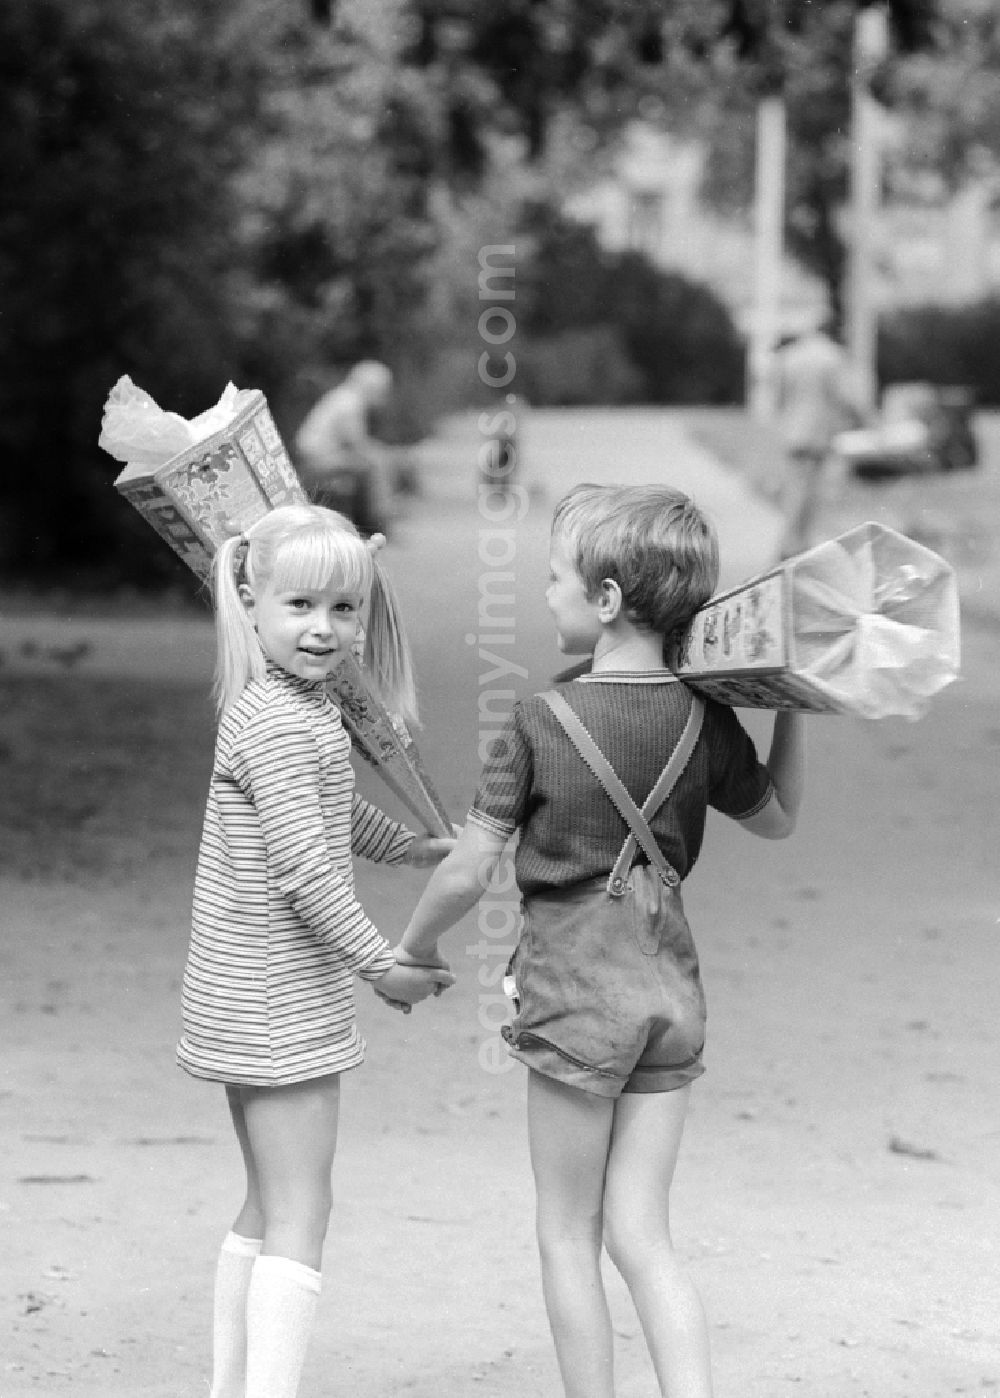 GDR picture archive: Berlin - Two first graders with their bags of sugar in Berlin, the former capital of the GDR, German Democratic Republic